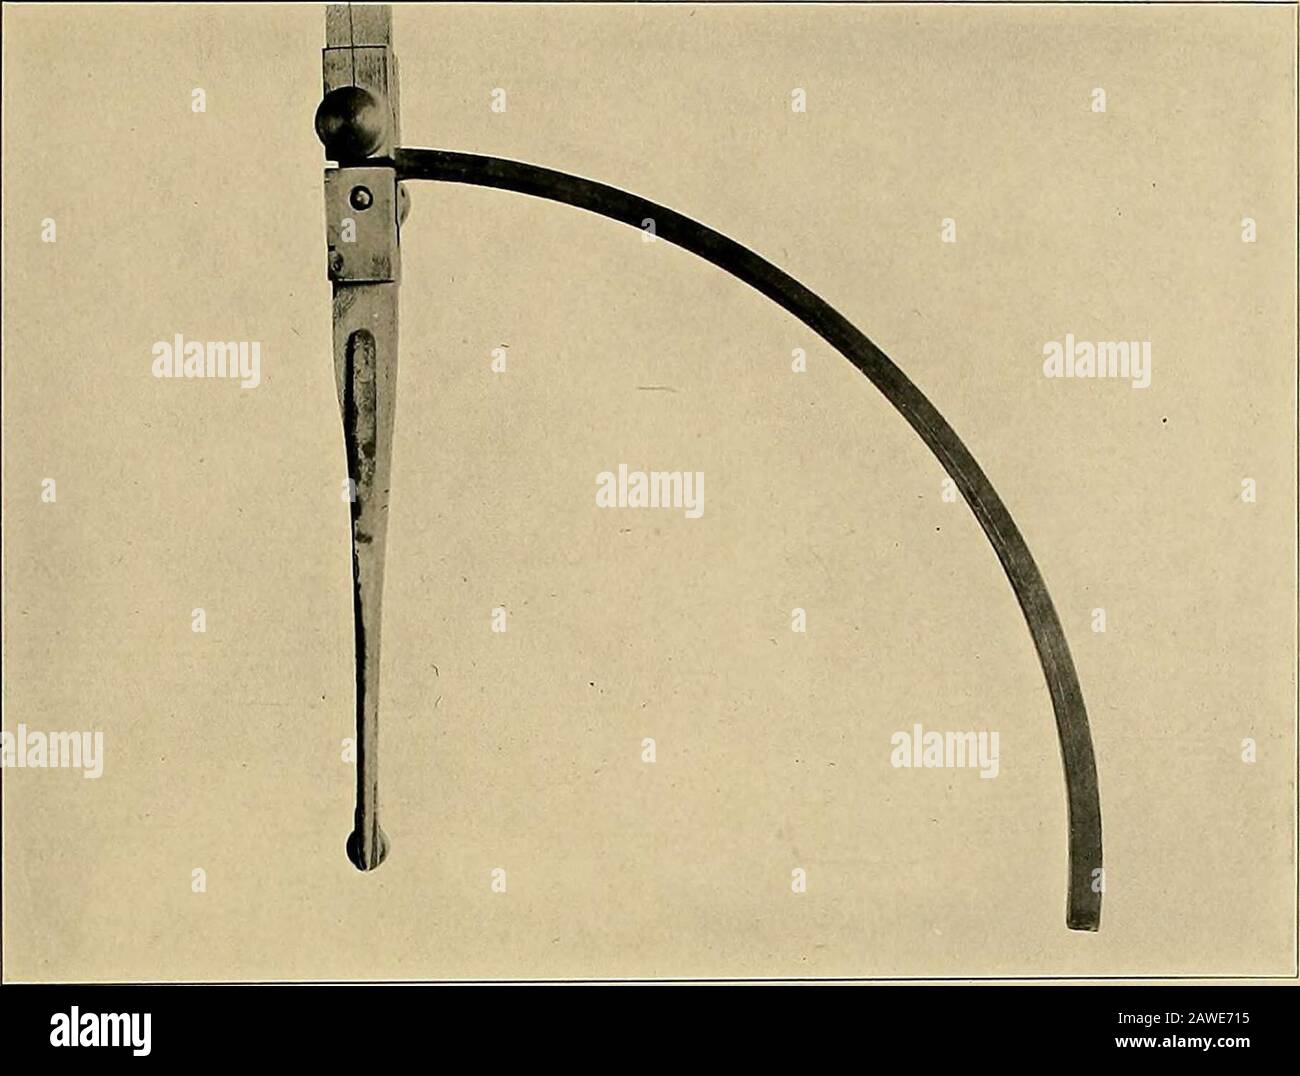 The Philippine journal of science . VENTRO-LATERAL VIEW OF THE CEPHALOGRAPH AT WORK AT TAYTAY, PROVINCE OF RIZAL, ISLAND OF LUZON, IN 1909. PLATE I. Bean : A Cephalograph.] [Phil. Journ. Sci., Vol. IV, No. 5.. Fig. 1. THE MEASURING ARM OF THE PANTOGRAPH. THE SIDE FACING THE OPERATOR OF THE CEPHALOGRAPH. Stock Photo